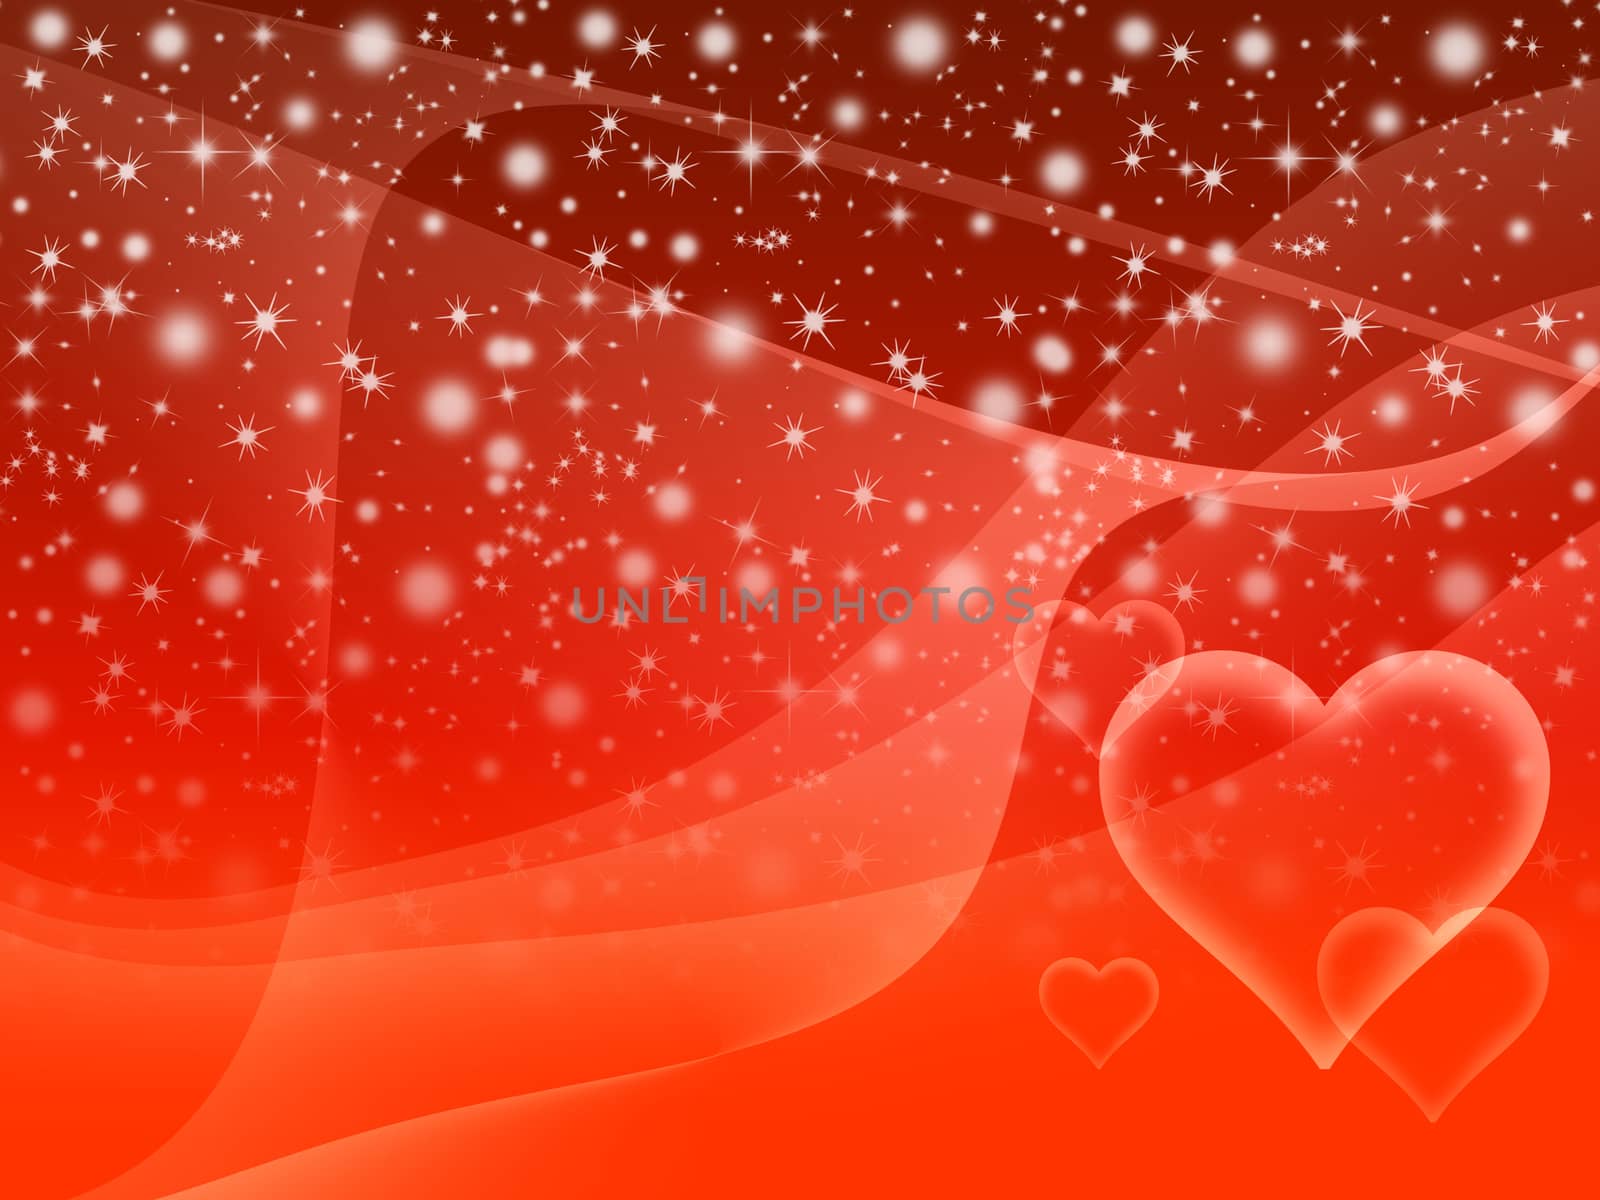 Valentine Hearts Abstract Pink Background. St.Valentine's Day Wallpaper. Heart Holiday Backdrop